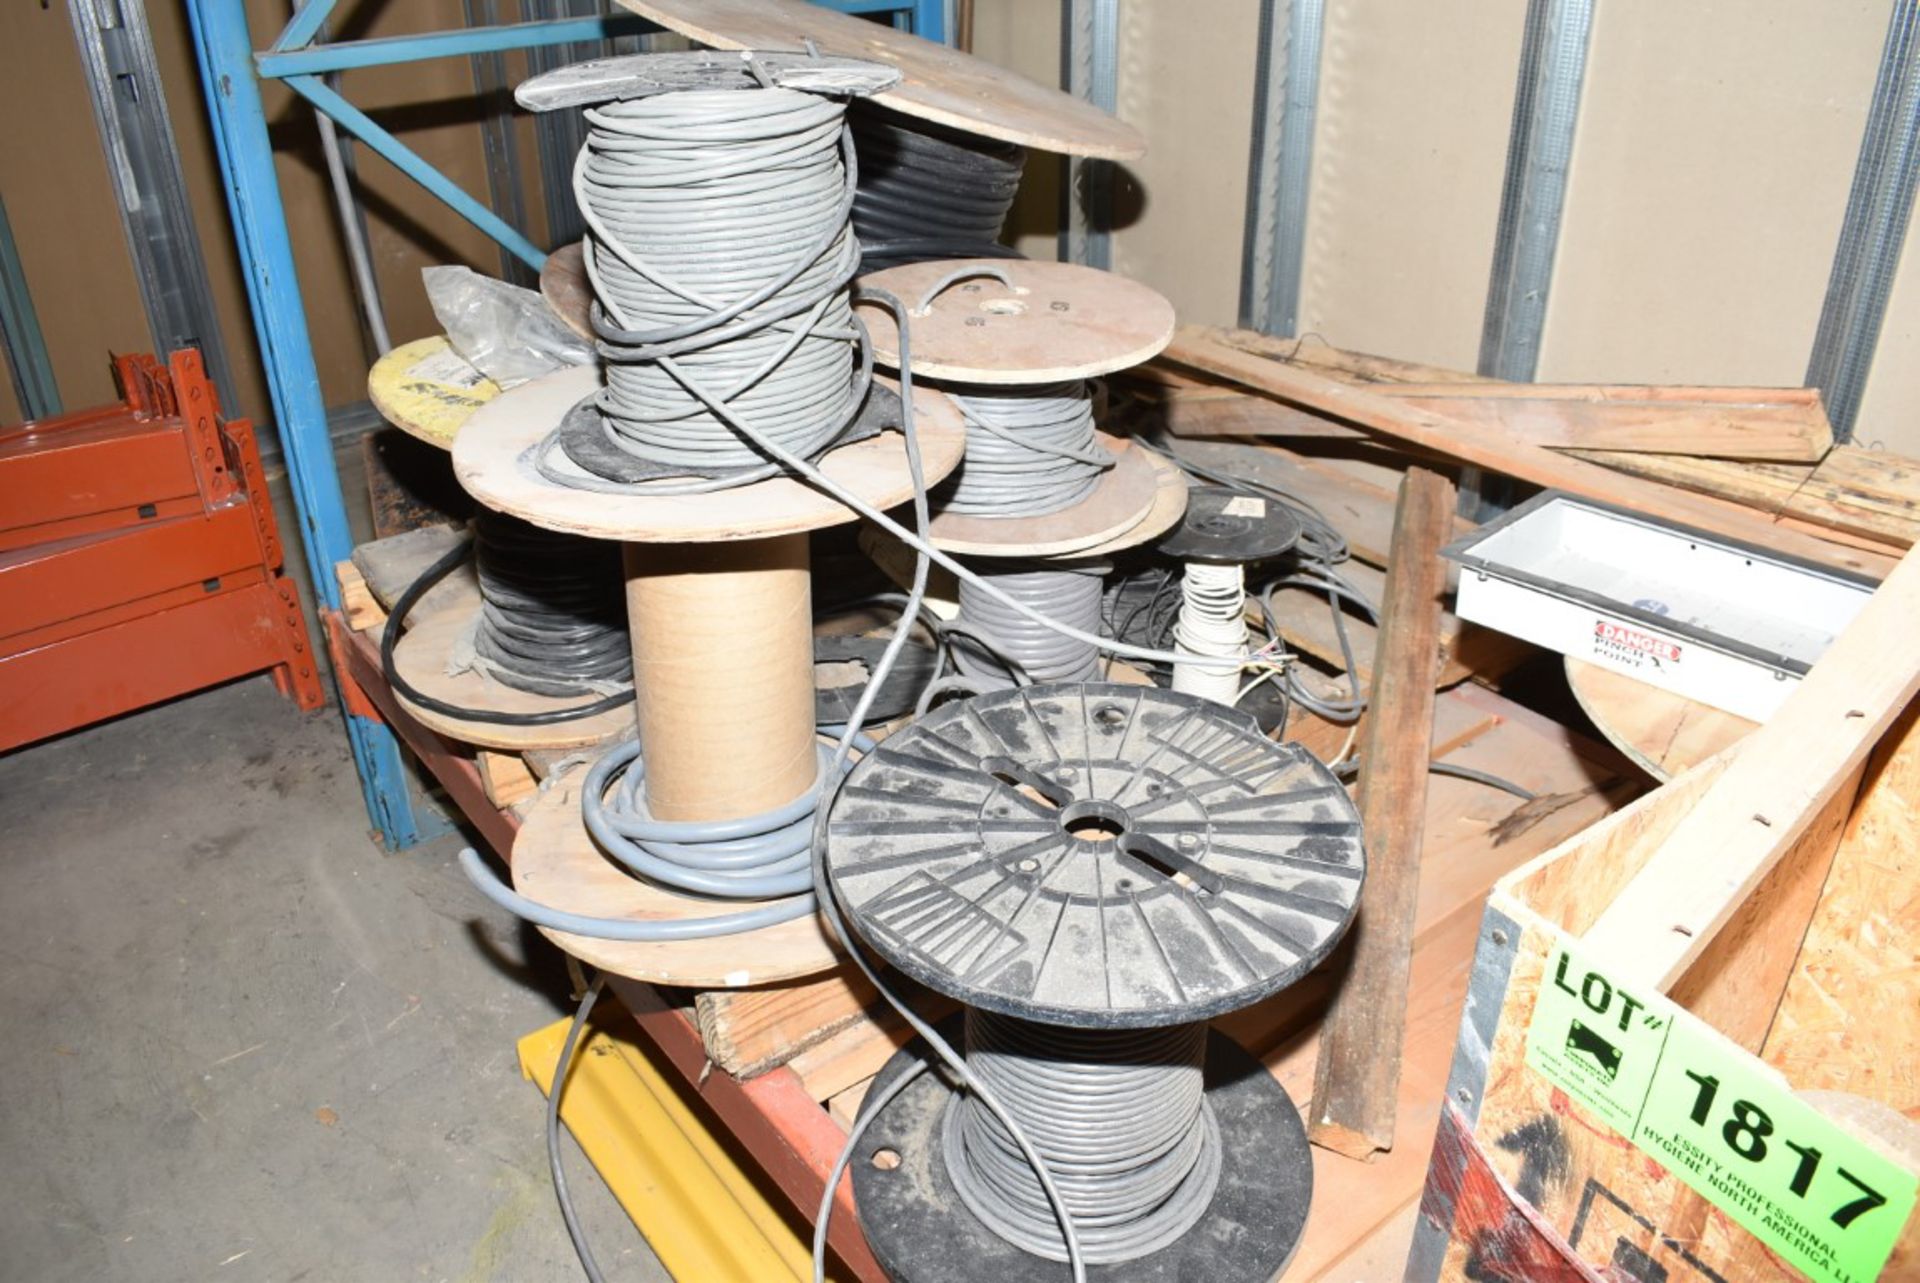 LOT/ CONTENTS OF SHELF - INCLUDING ELECTRICAL WIRE/CABLE, SPARE MOTOR, SPARE PARTS [RIGGING FEE - Image 3 of 3